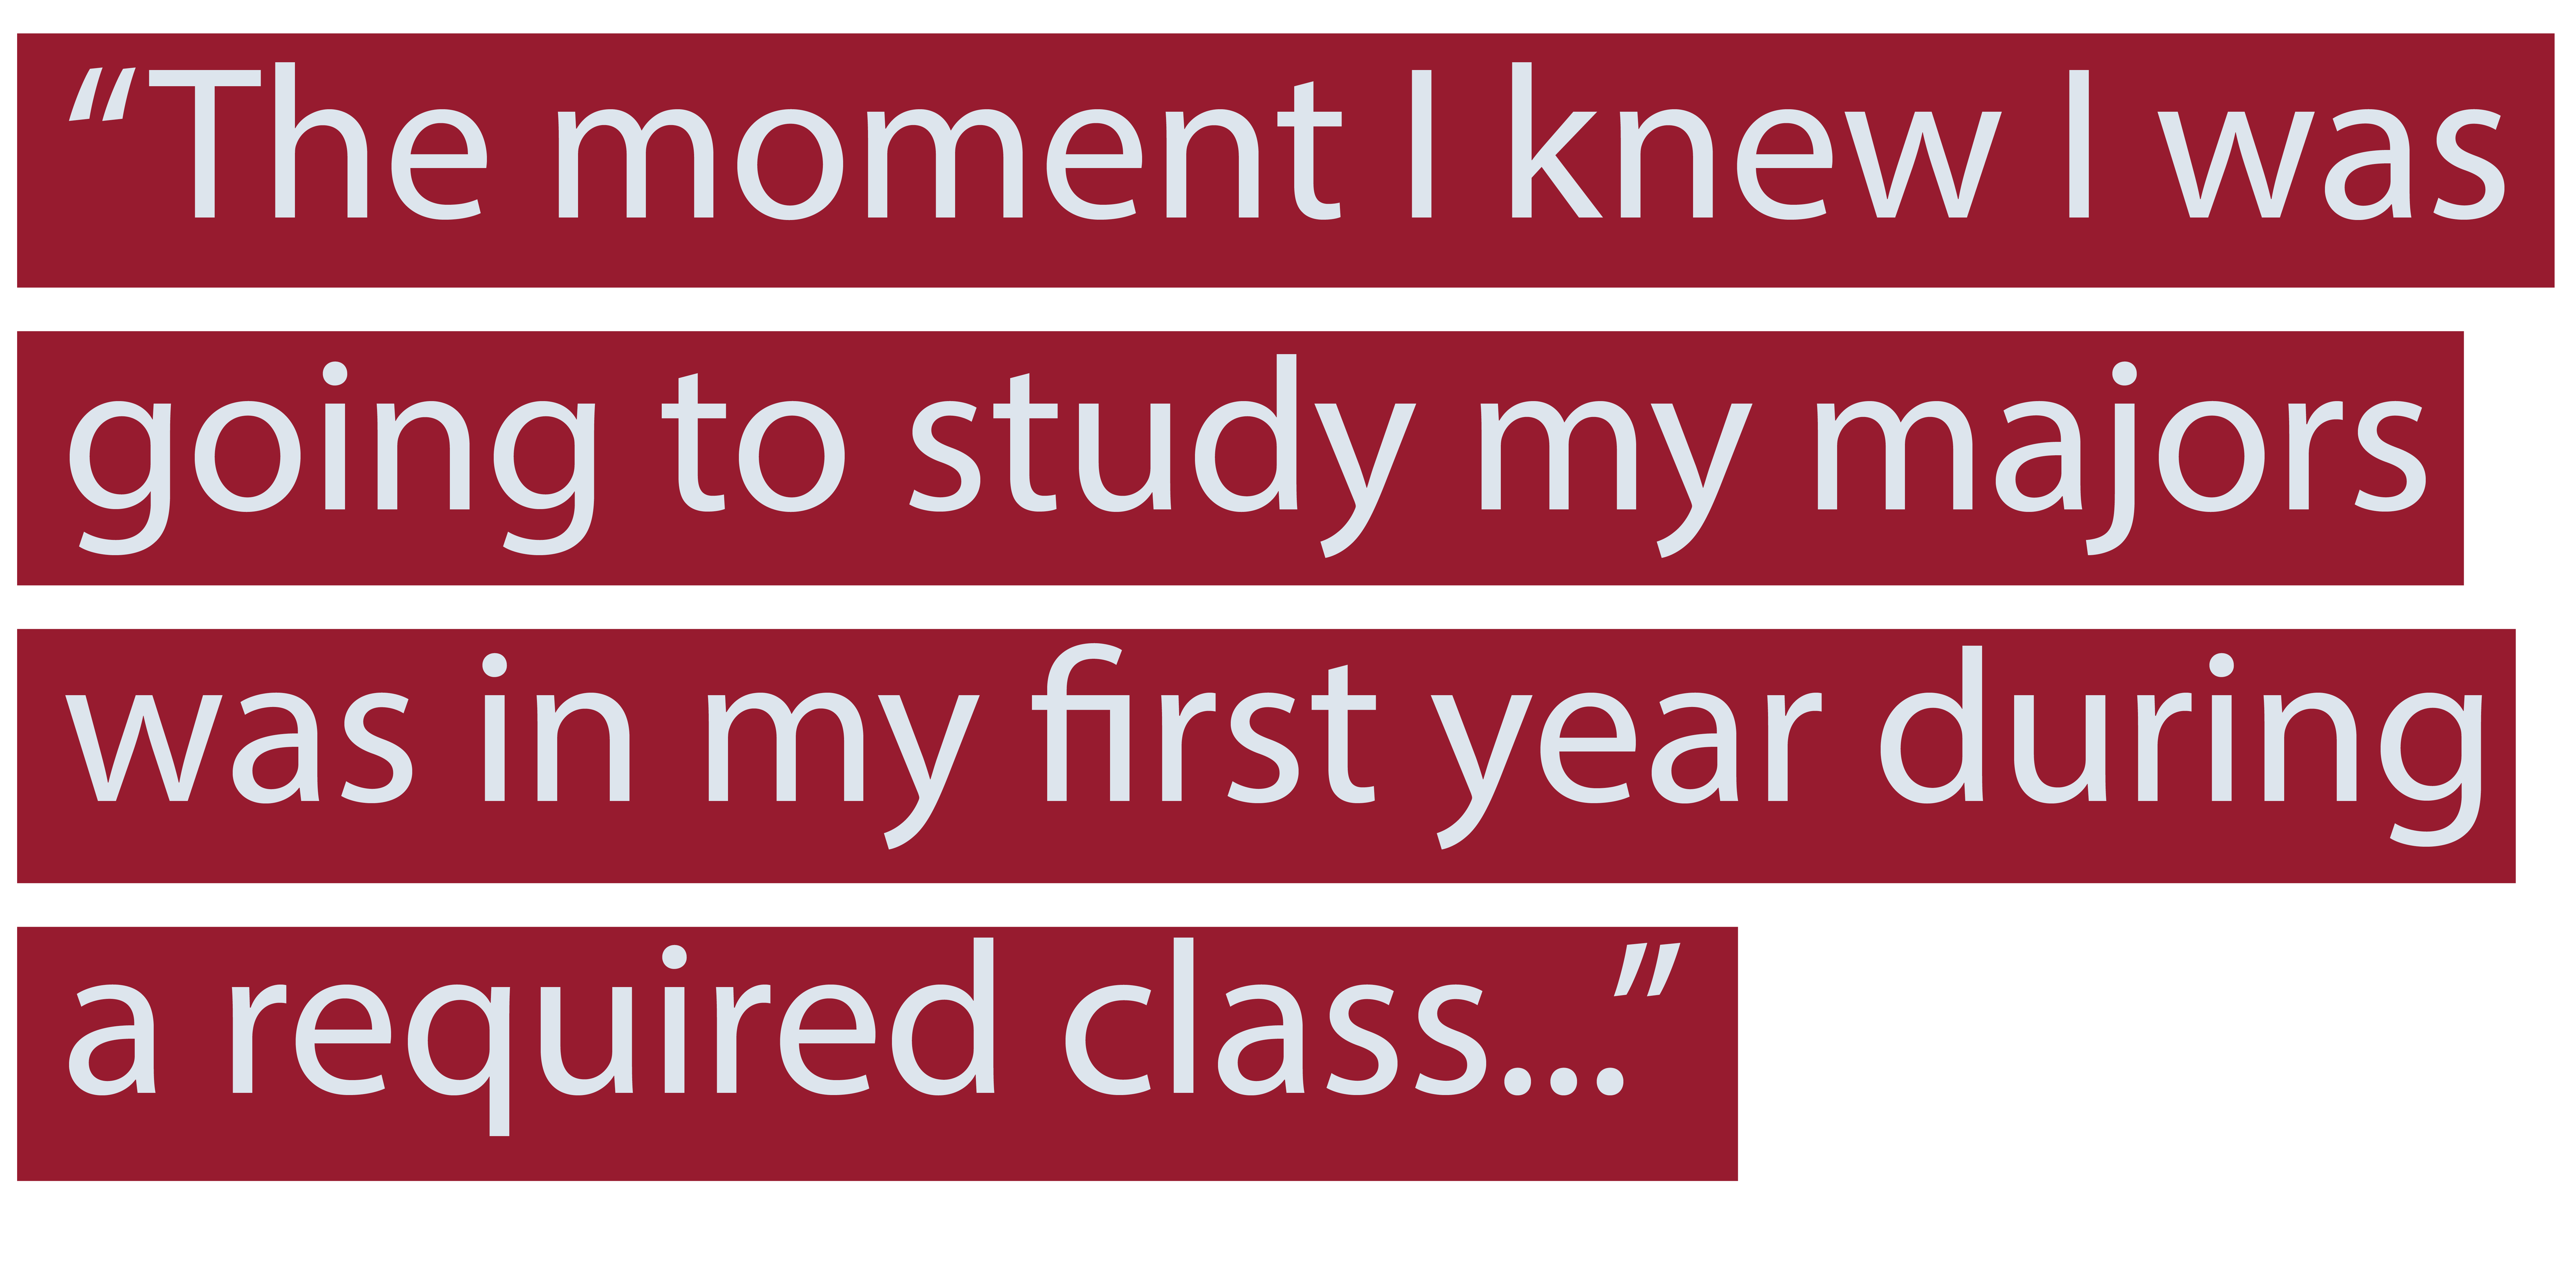 "The moment I knew I was going to study my majors was in my first year during a required class..."